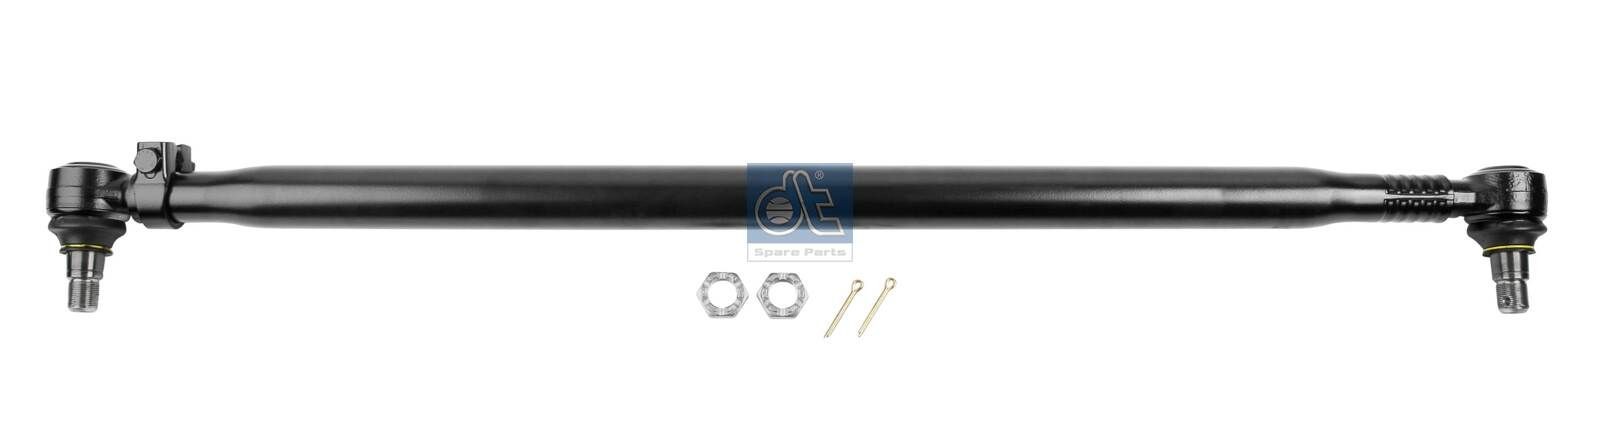 DT Spare Parts 3.63056 Rod Assembly 36.46610-6010